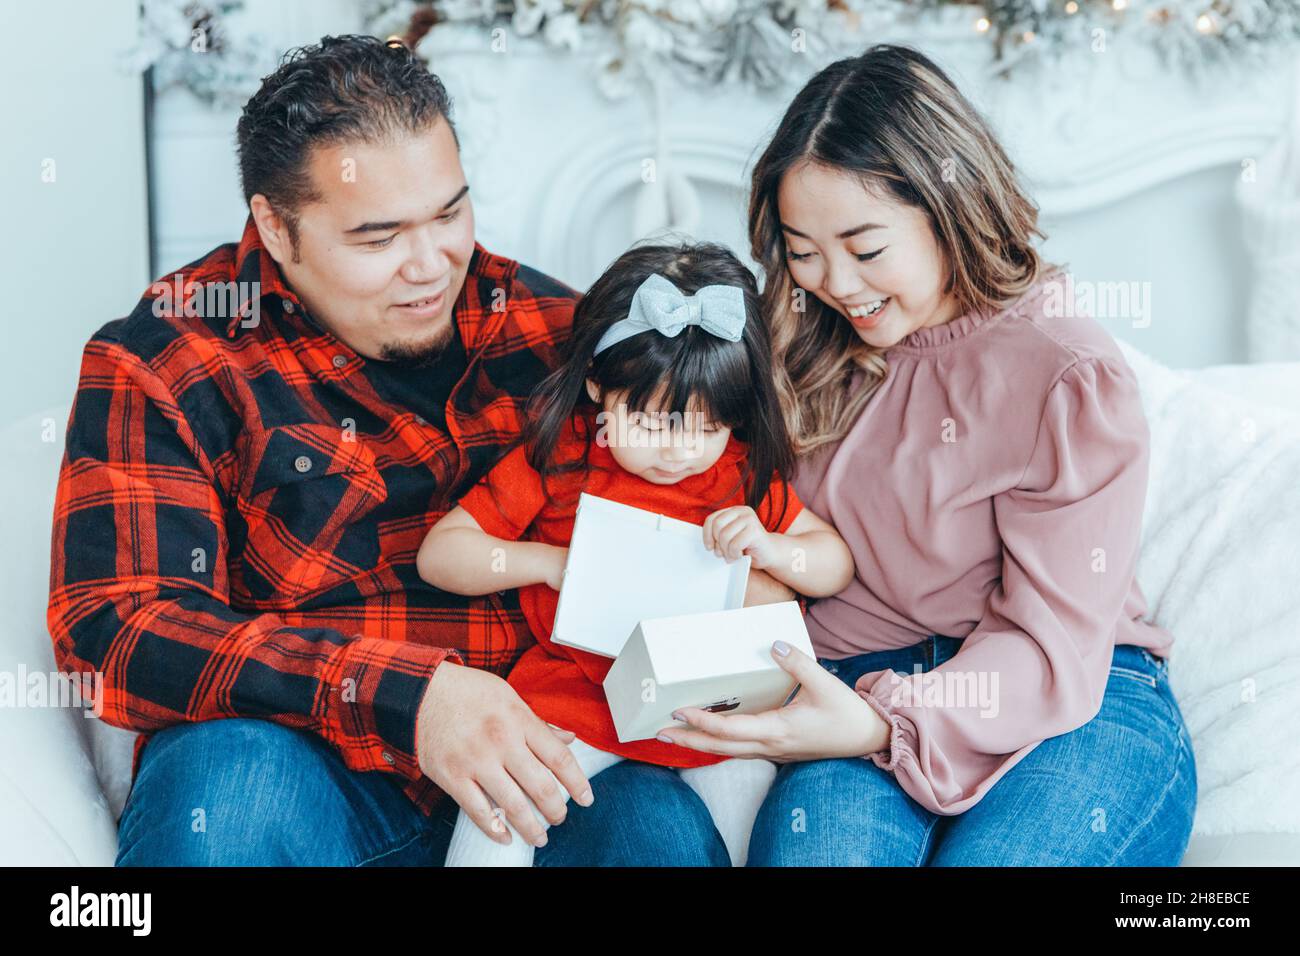 Asian family father, mother giving gift box with present to daughter toddler girl celebrating Christmas or New Year. Mixed race mom, dad, daughter sit Stock Photo